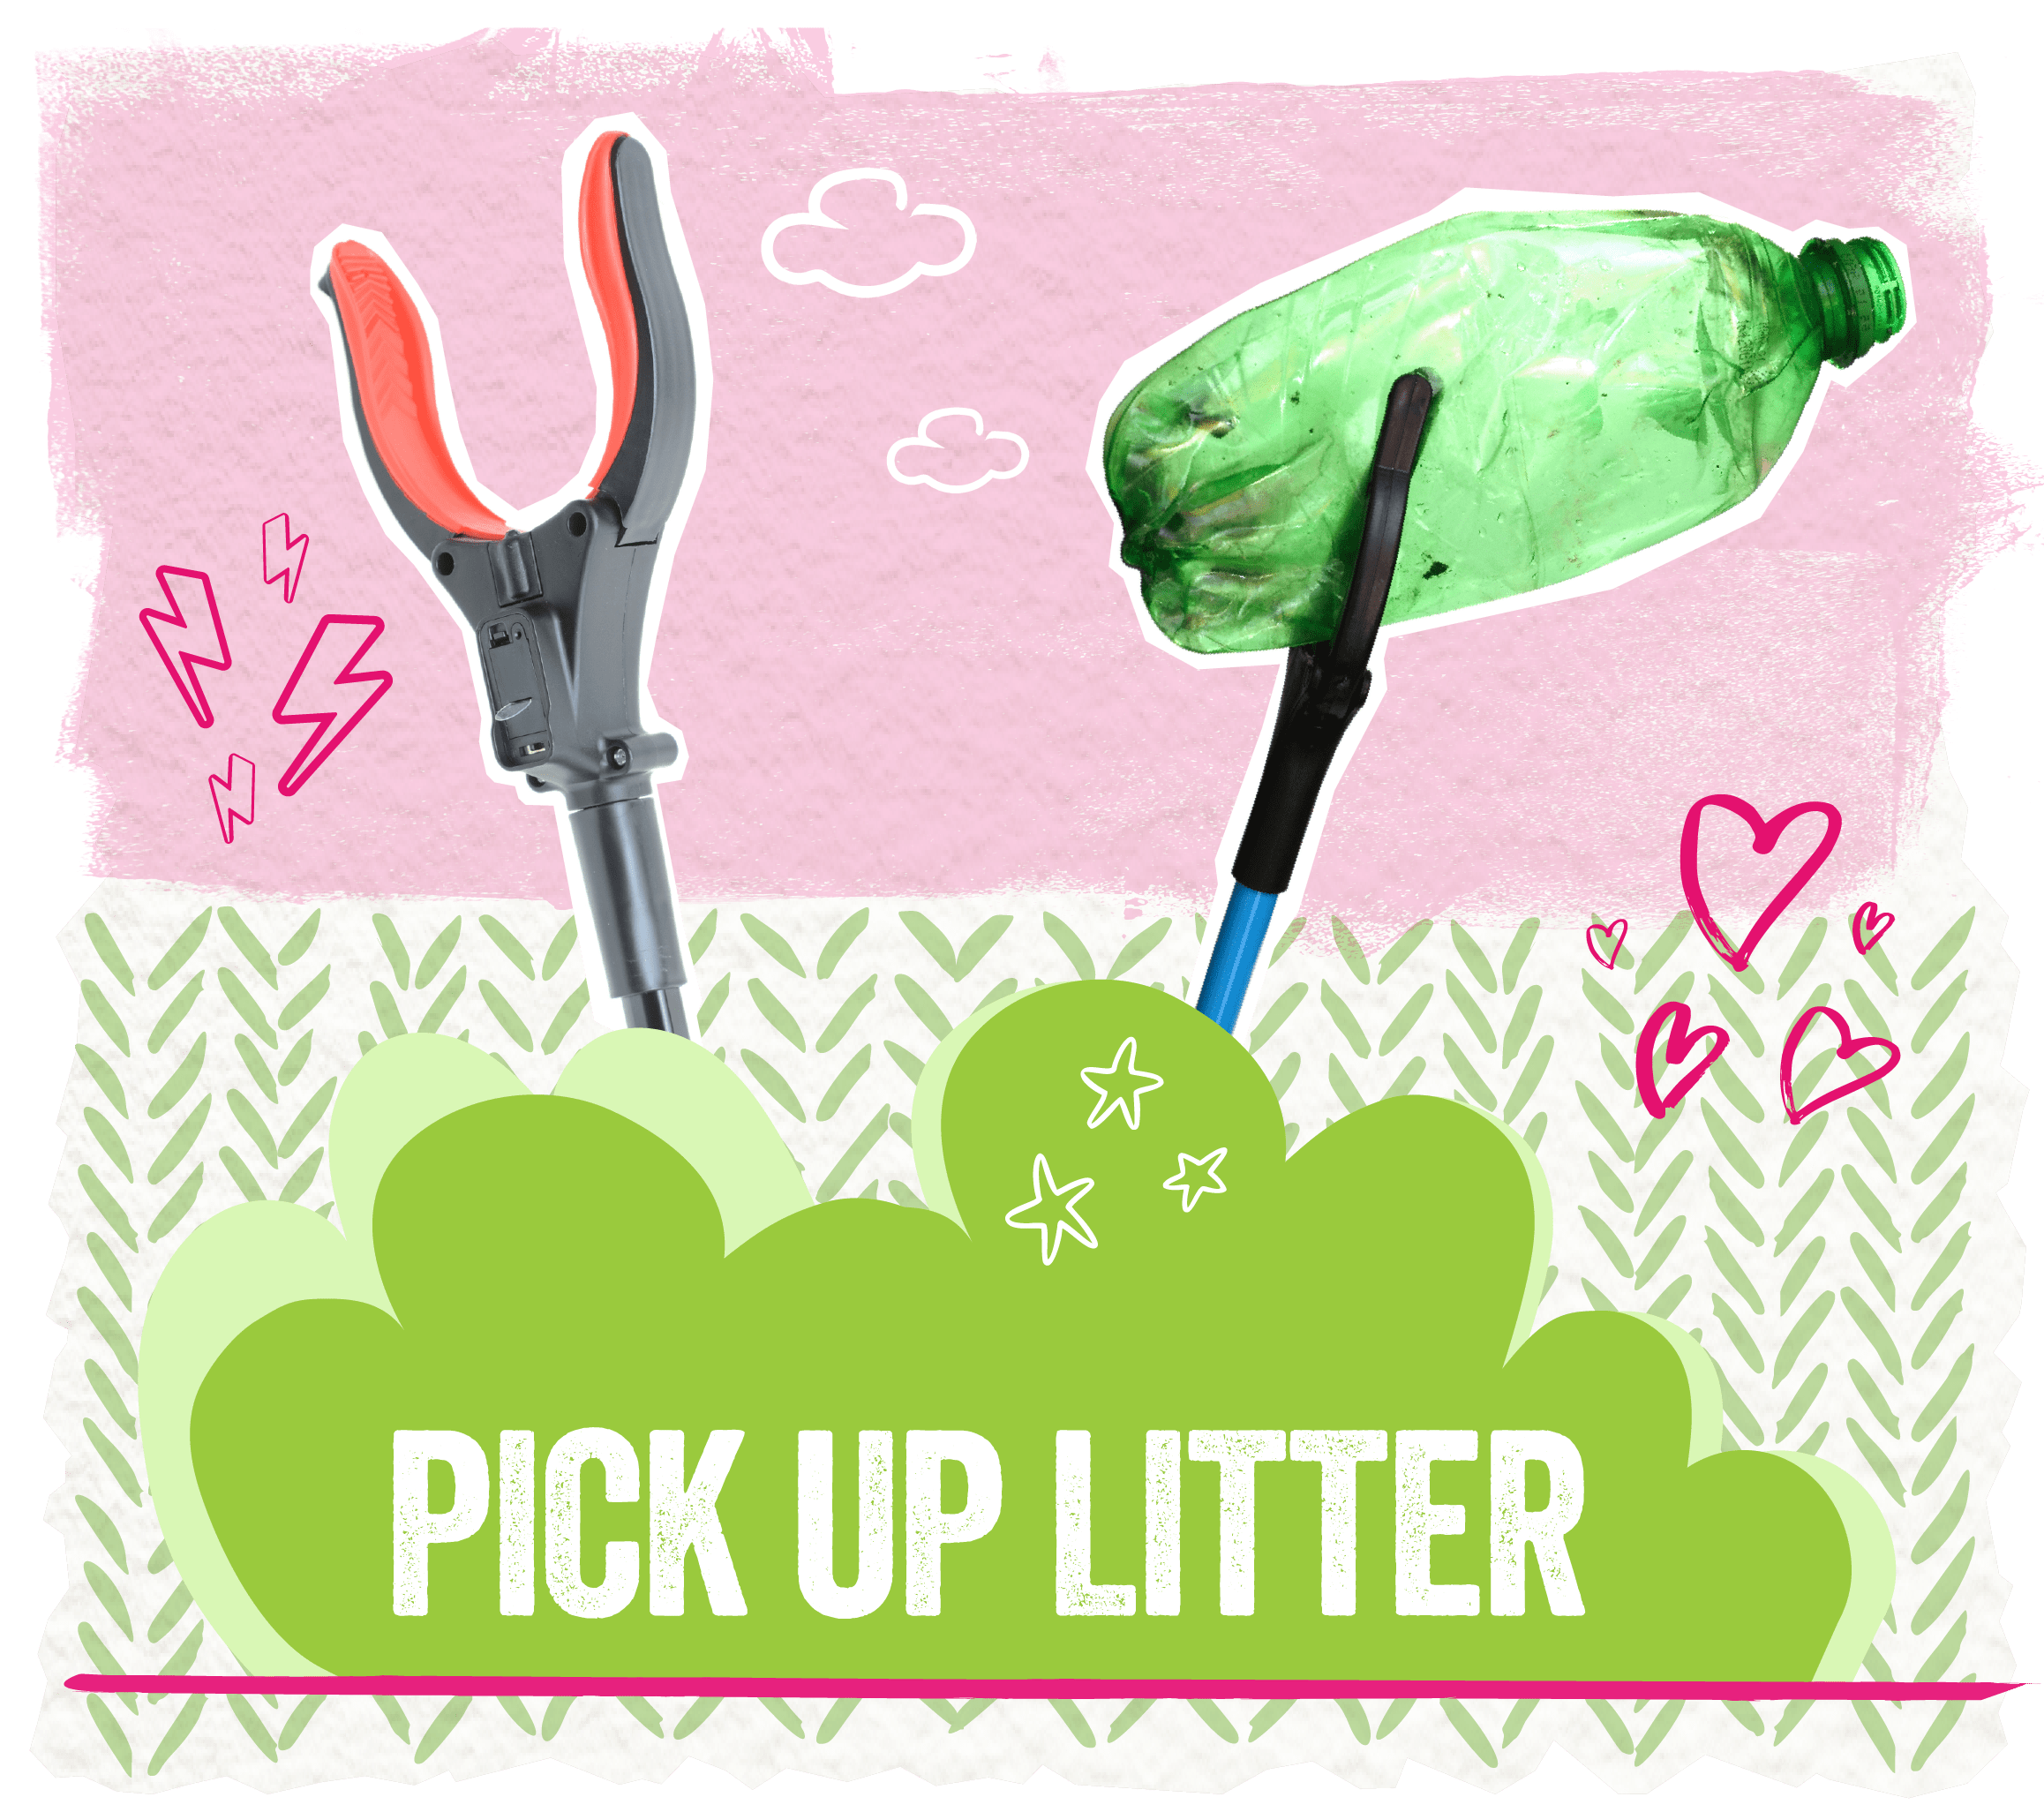 Pick up litter graphic